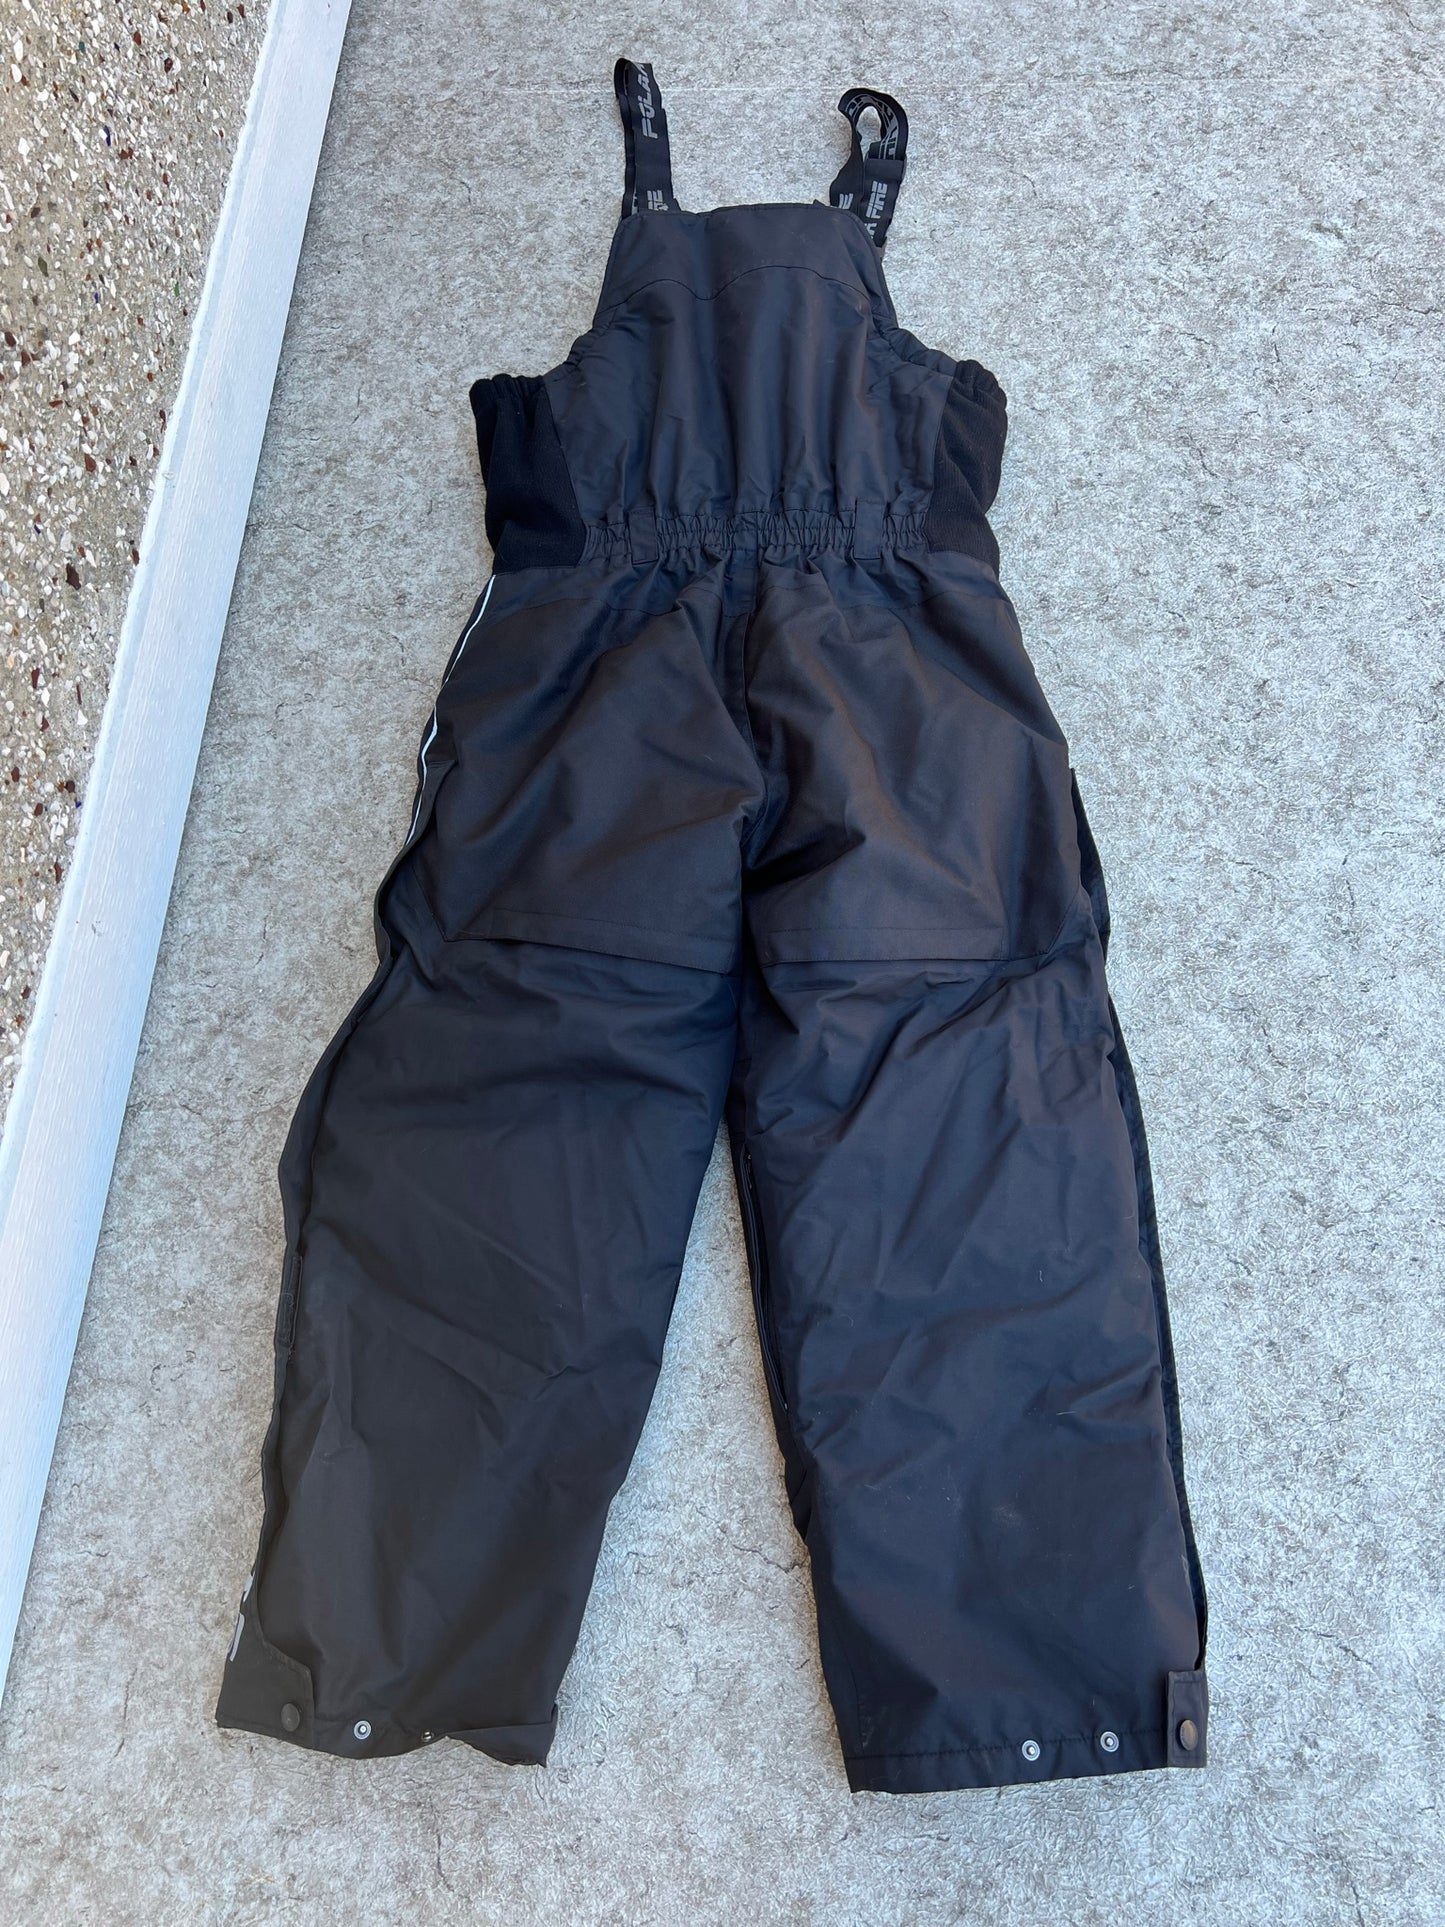 Snow Pants Men's Size Medium Polar Fire With Bib Insulated Waterproof Beathable Perfect For Deep Cold and Snowmobile Black As New